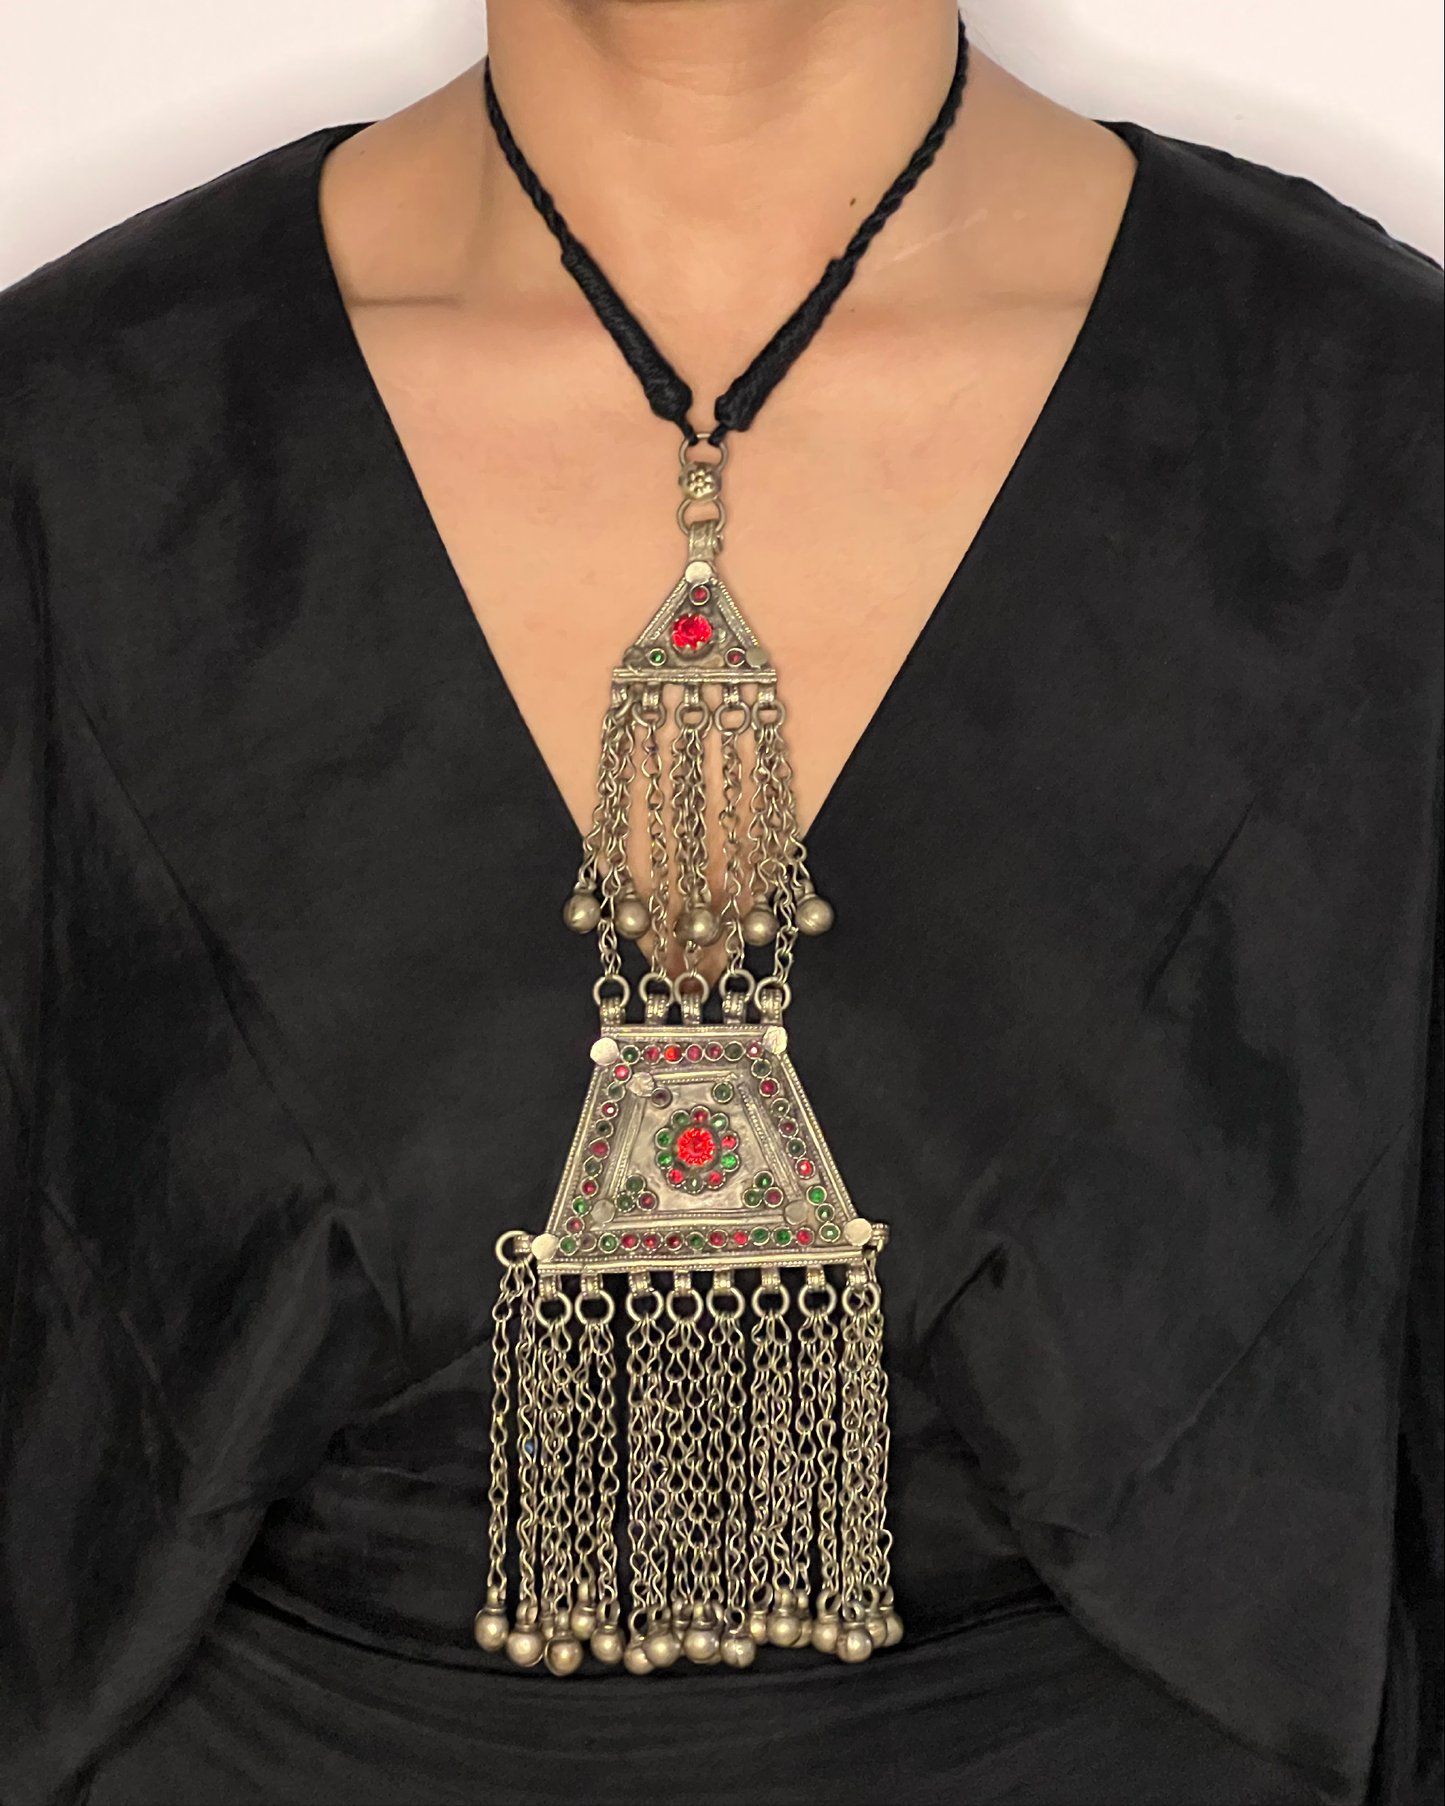 Shayan Afghan Necklace